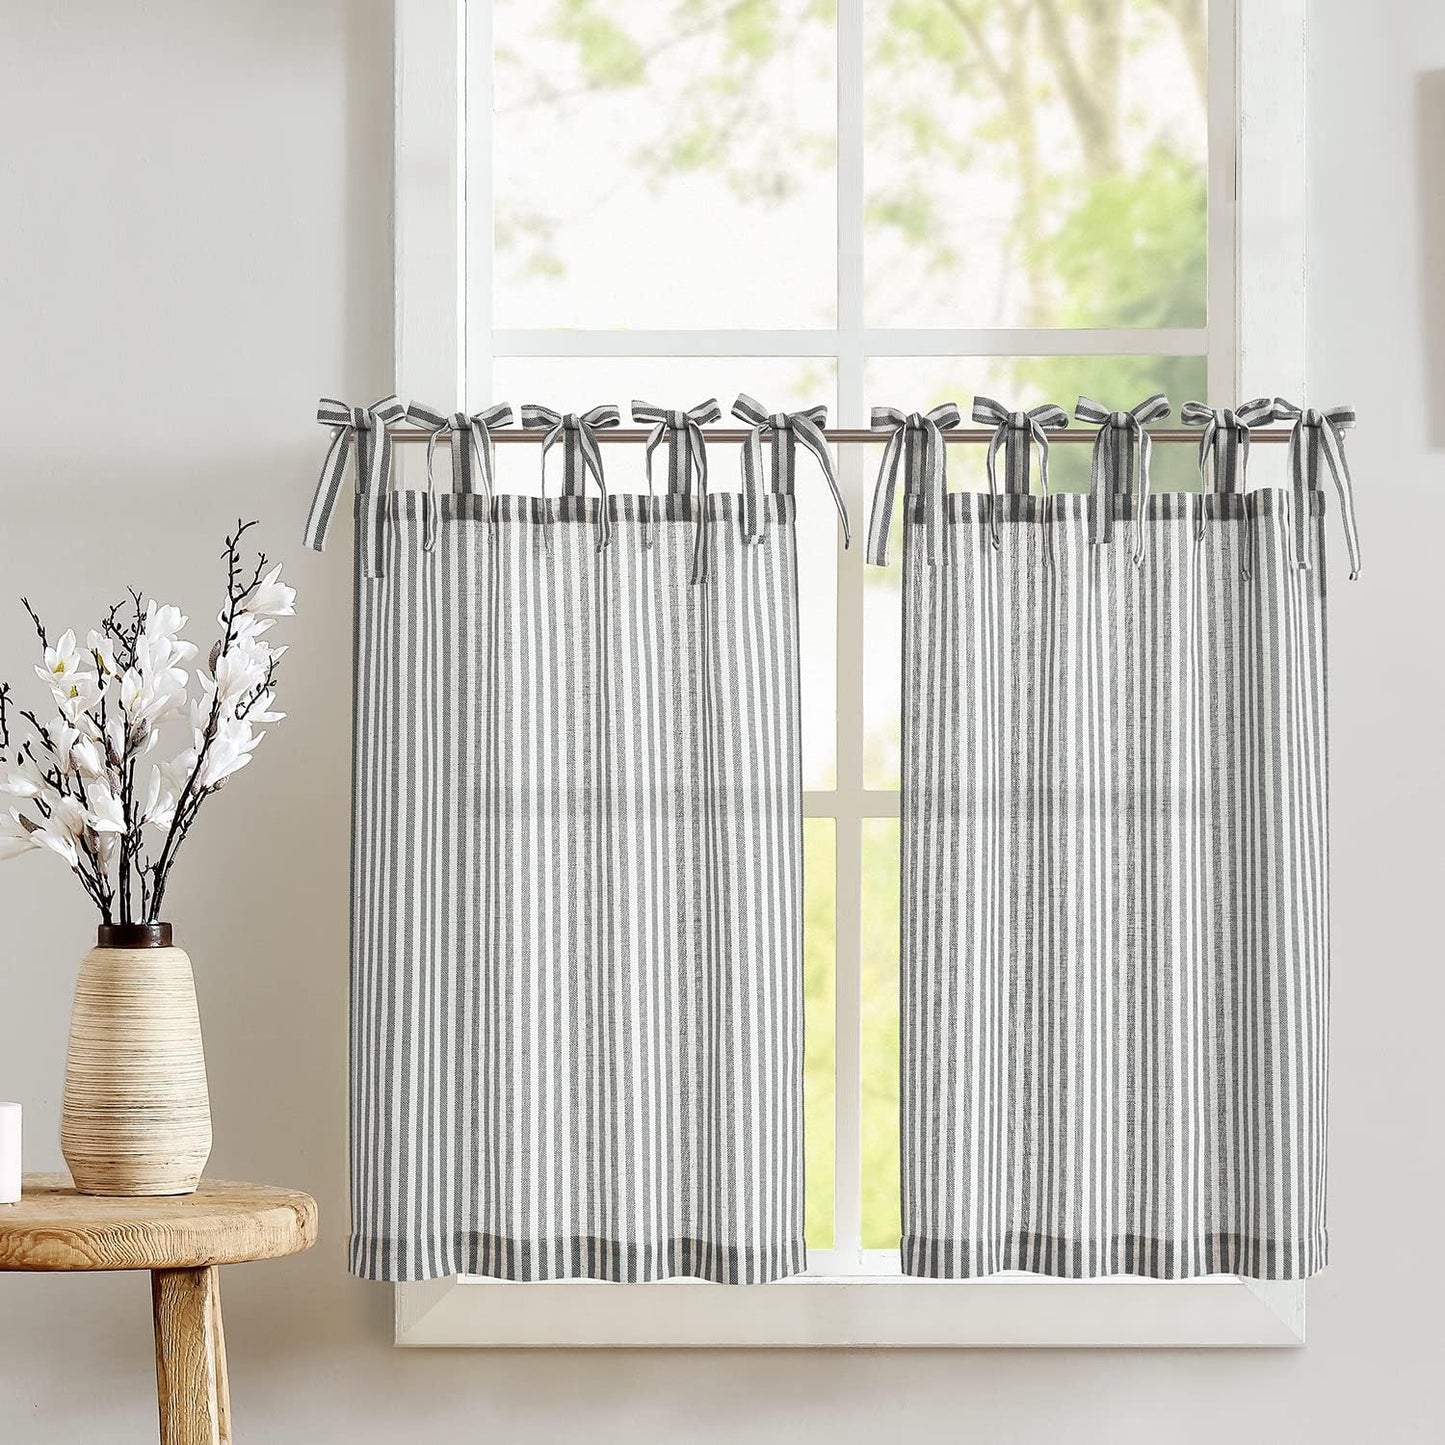 Jinchan Kitchen Curtains Striped Tier Curtains Ticking Stripe Linen Curtains Pinstripe Cafe Curtains 24 Inch Length for Living Room Bathroom Farmhouse Curtains Rod Pocket 2 Panels Black on Beige  CKNY HOME FASHION Tie Top Striped Black W26 X L24 